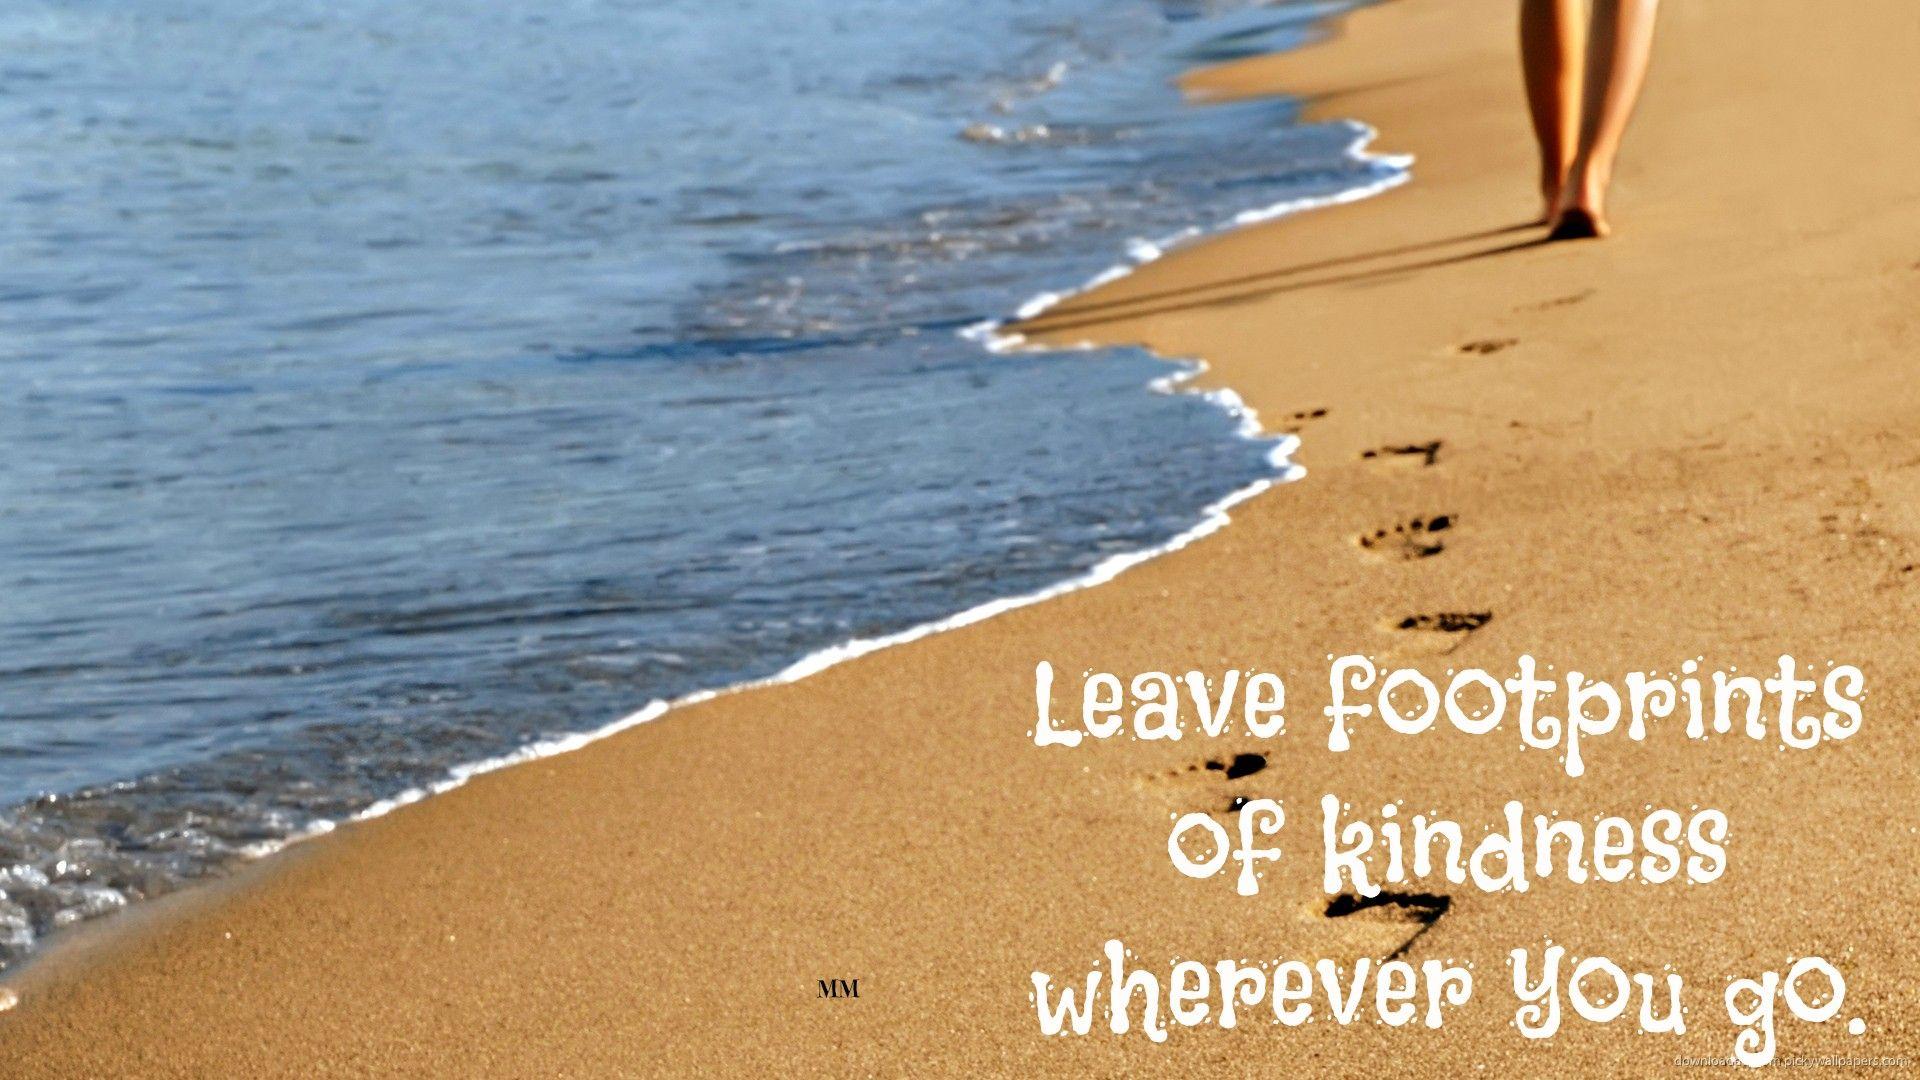 Beach Nature Thoughts Sayings Footprints Life Quotes Words Beaches